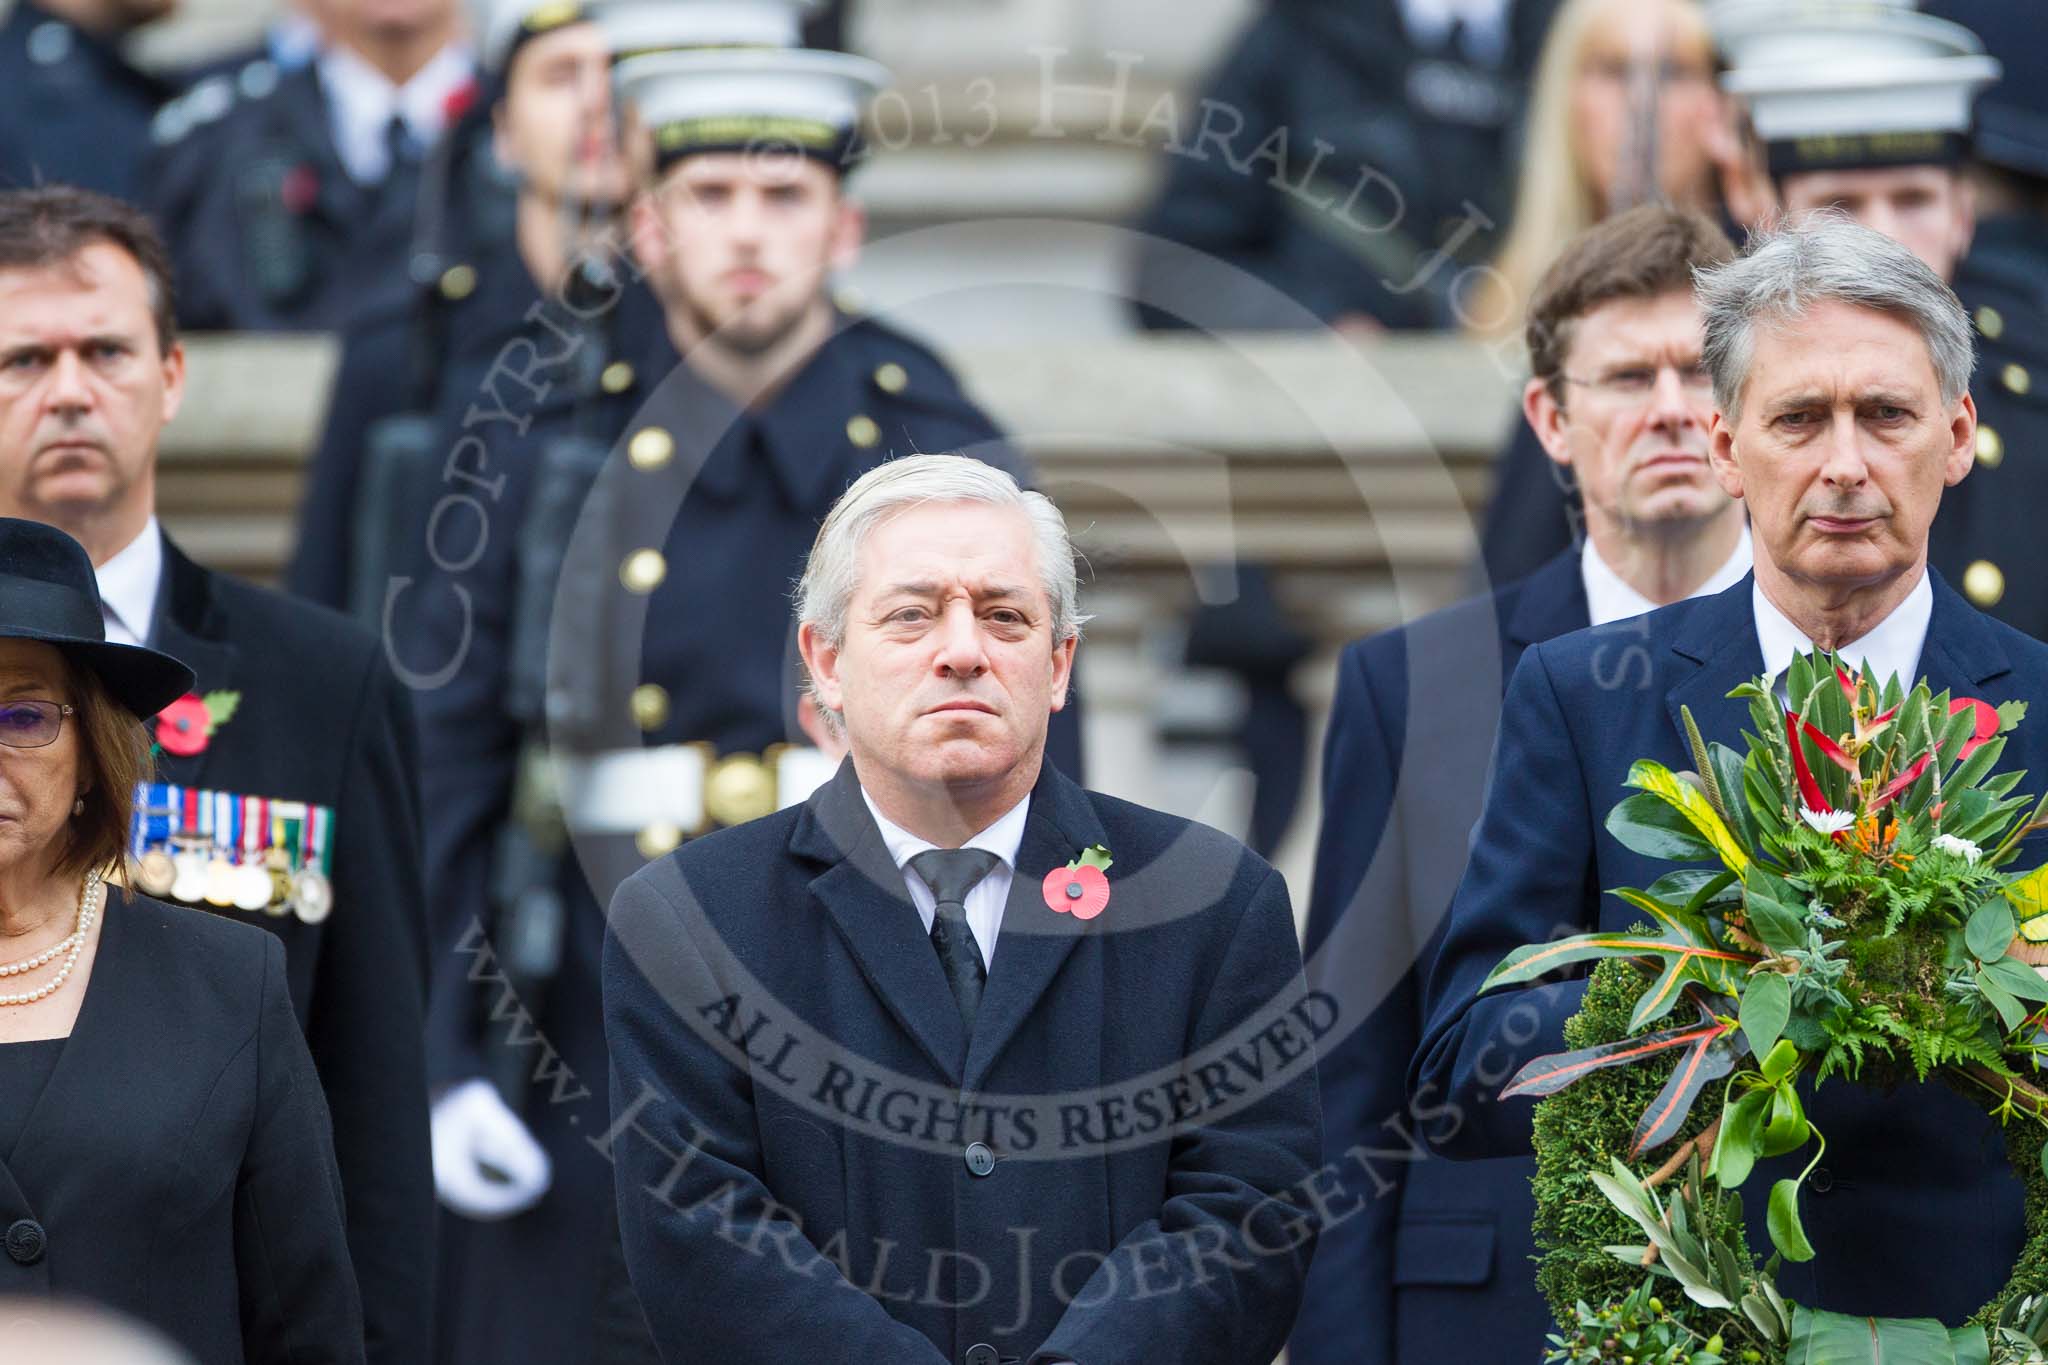 Remembrance Sunday at the Cenotaph 2015: The Speaker of the House of Commons, Rt. Hon John Bercow MP, and The Secretary of State for Foreign and Commonwealth Affairs, the Rt Hon Philip Hammond MP. Image #151, 08 November 2015 11:02 Whitehall, London, UK